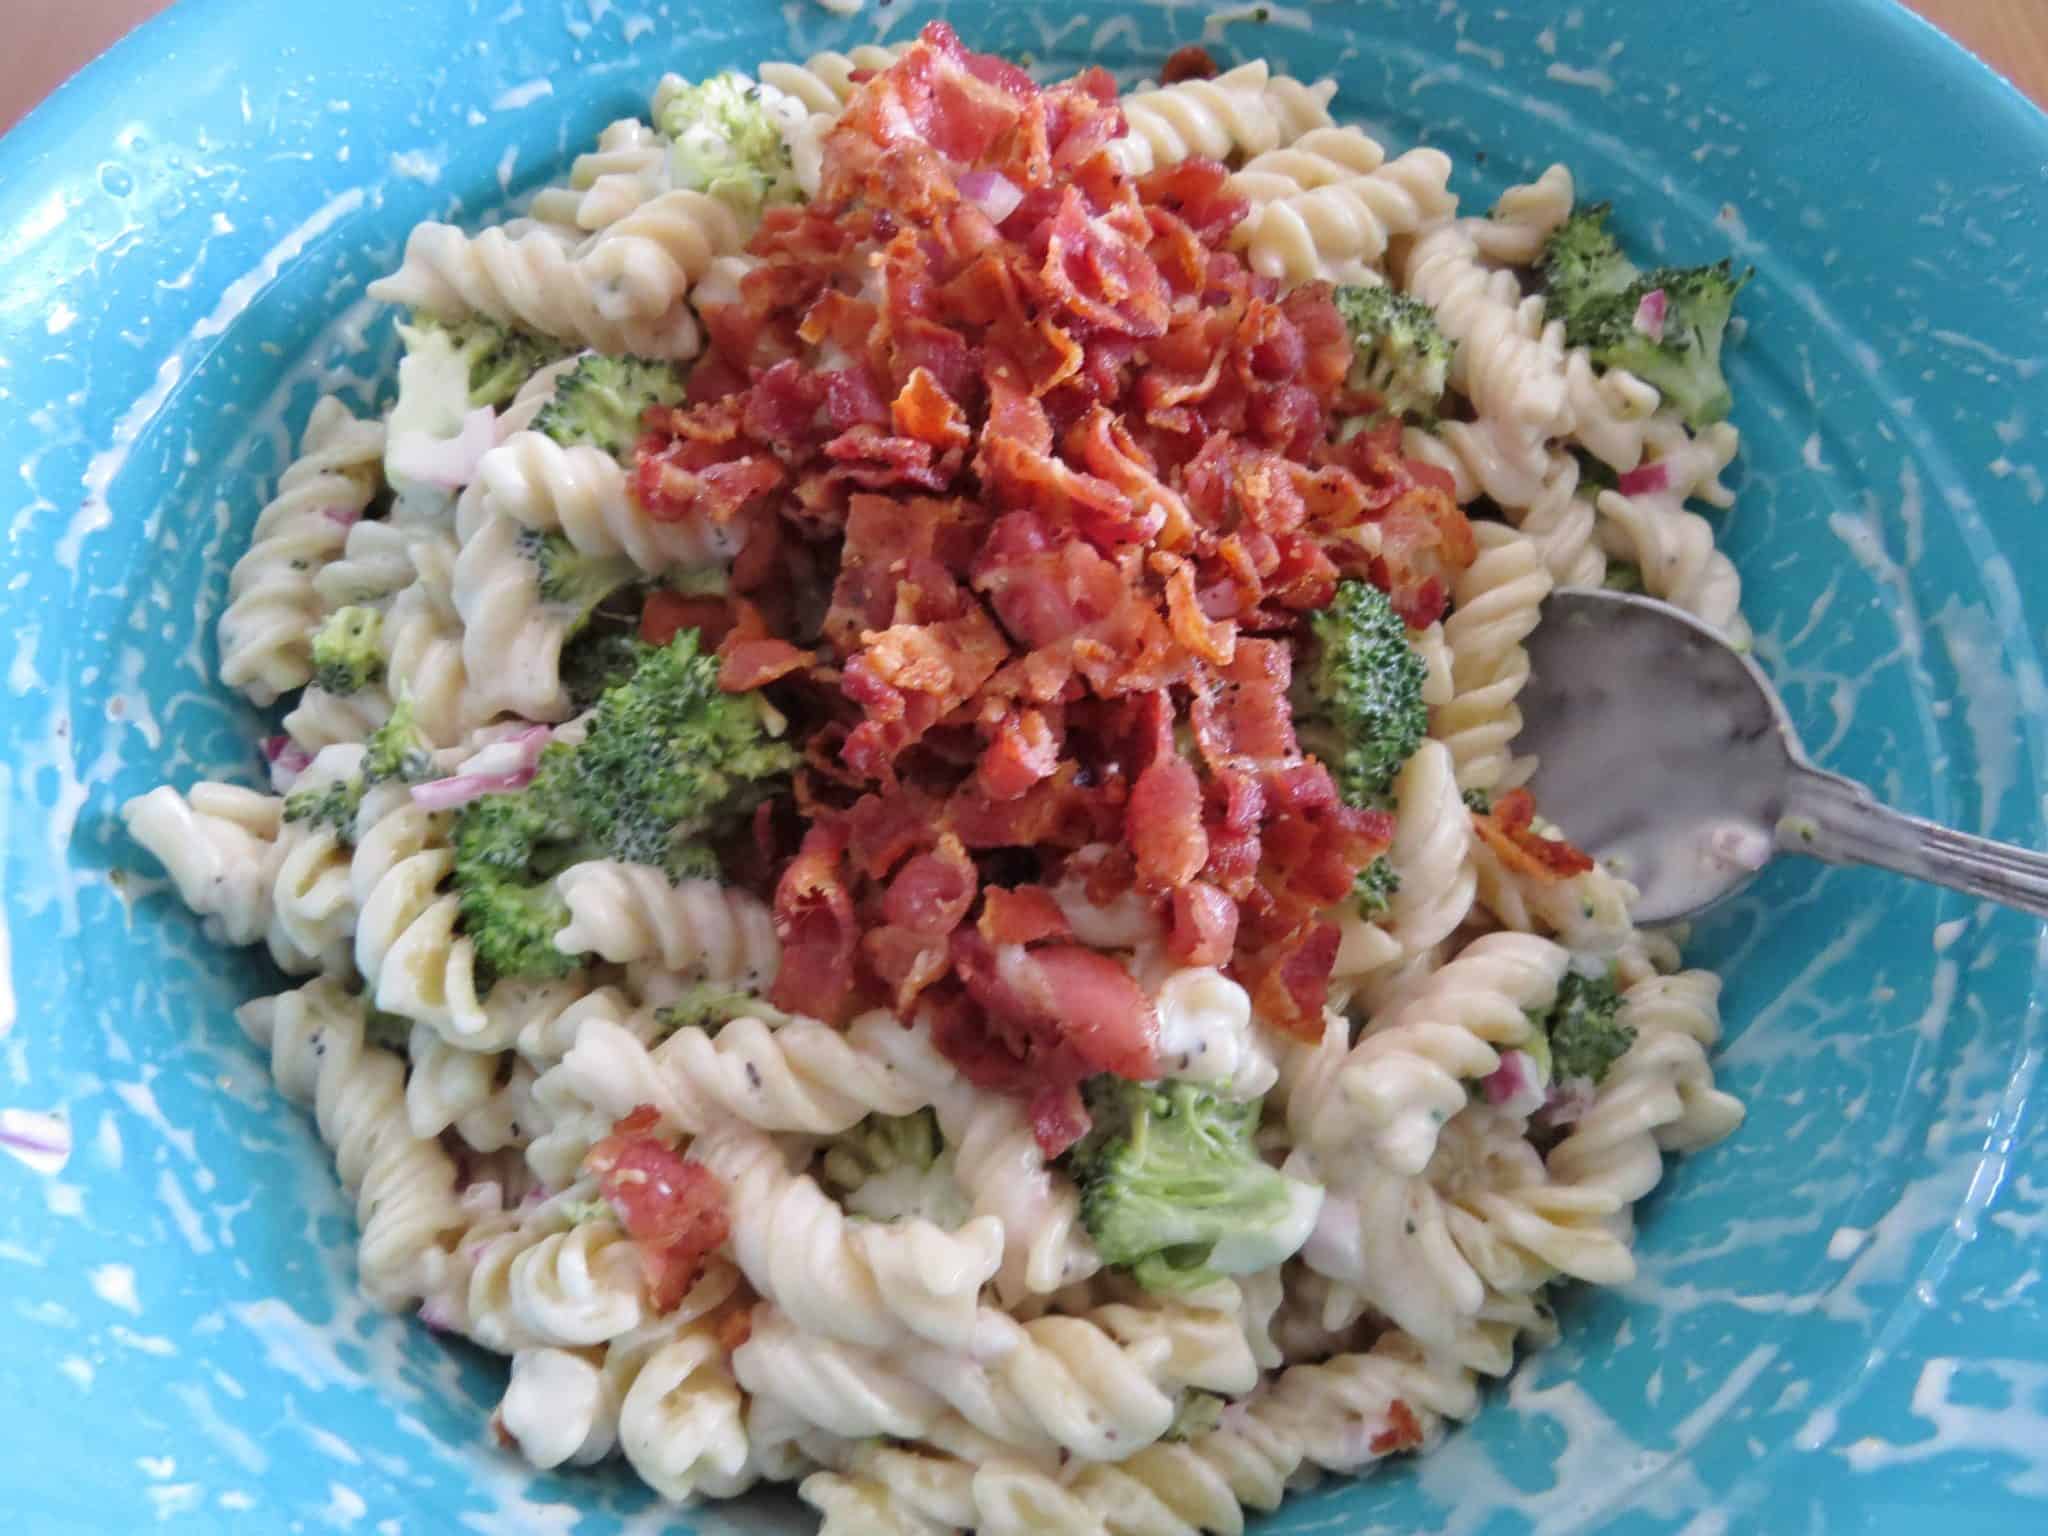 cooked crumbled bacon stirred together with broccoli florets, diced red onion and cooked rotini pasta and creamy dressing in a blue bowl.